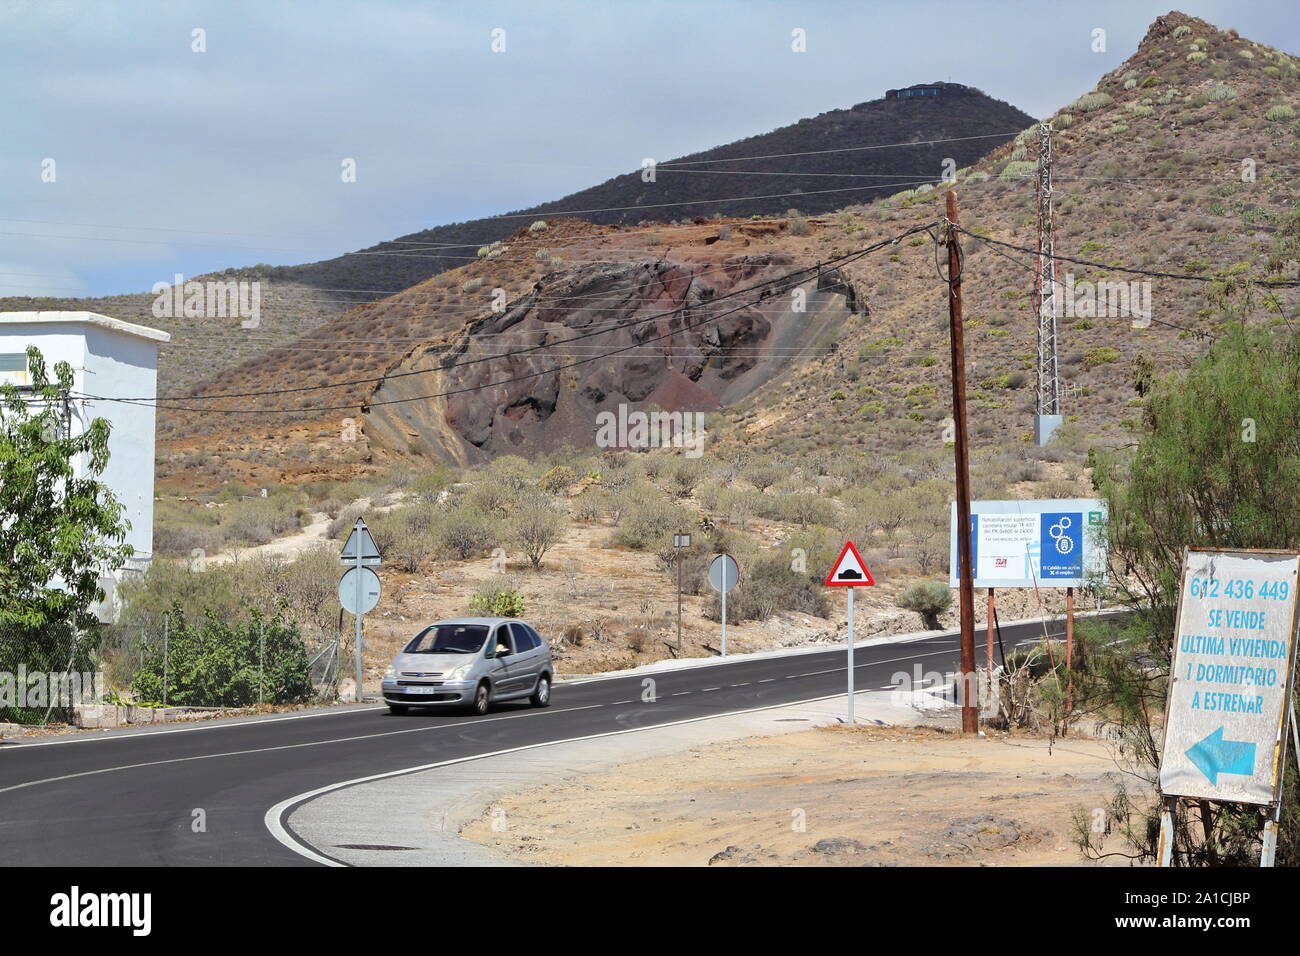 sink hole, sand pit, Rural drive, South side, Tenerife, Canary Islands, Spain; 2019 Stock Photo